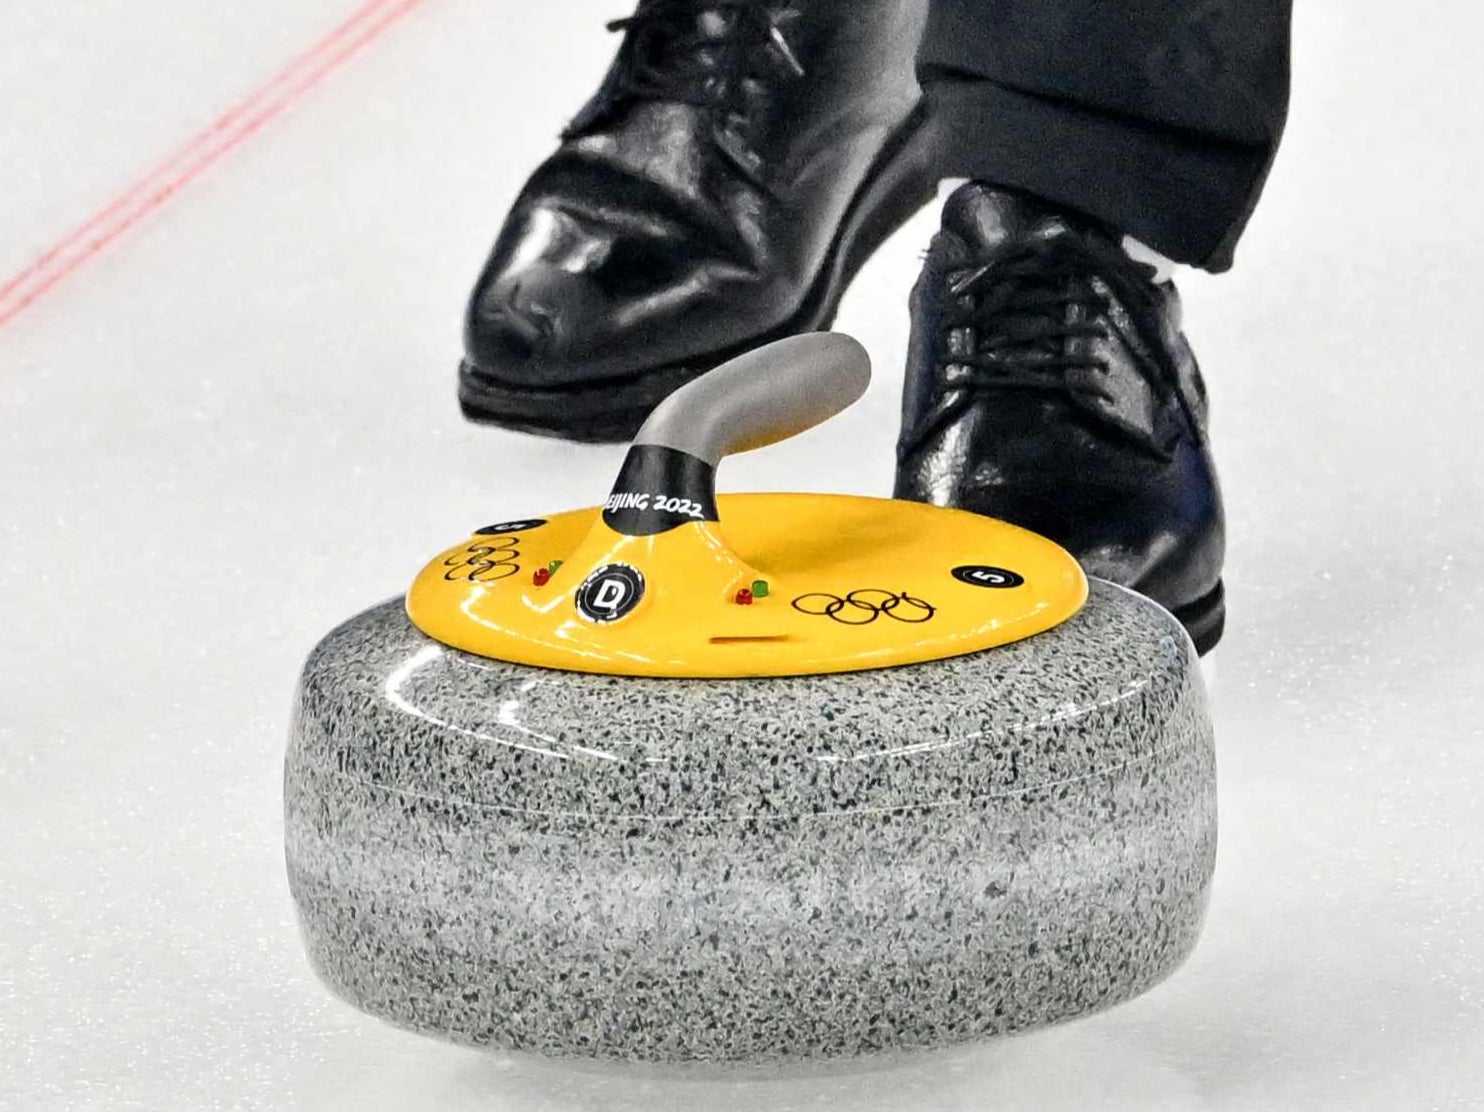 Each curling stone has a set of lights